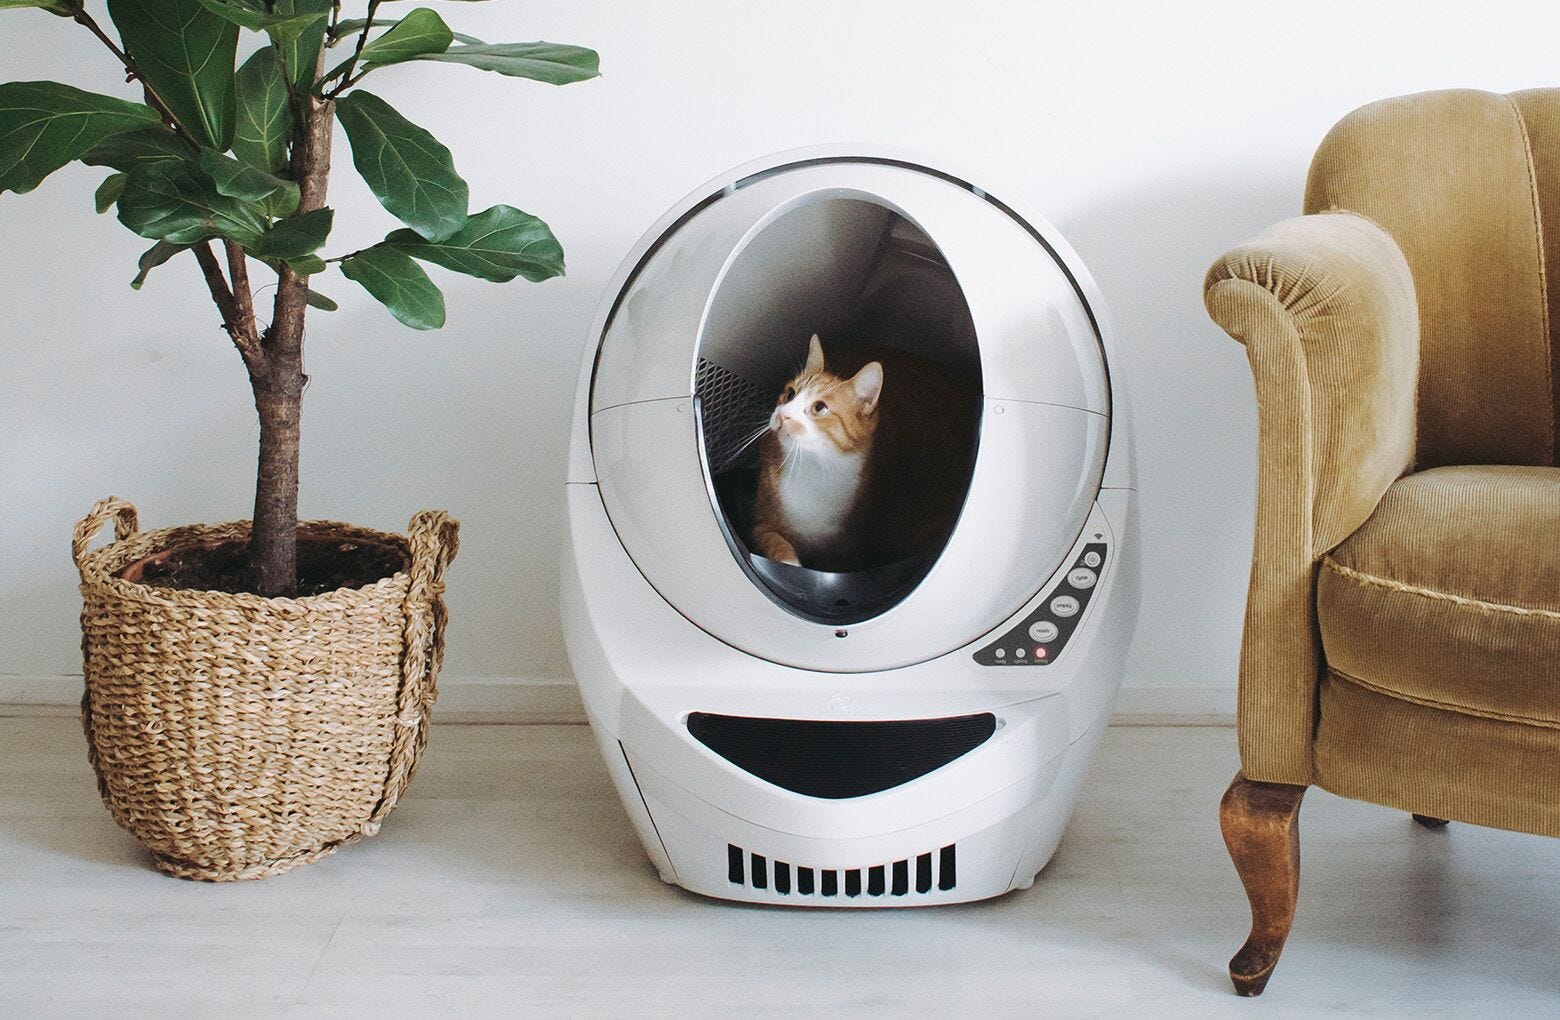 Orange and white cat peeking out from inside a litter robot